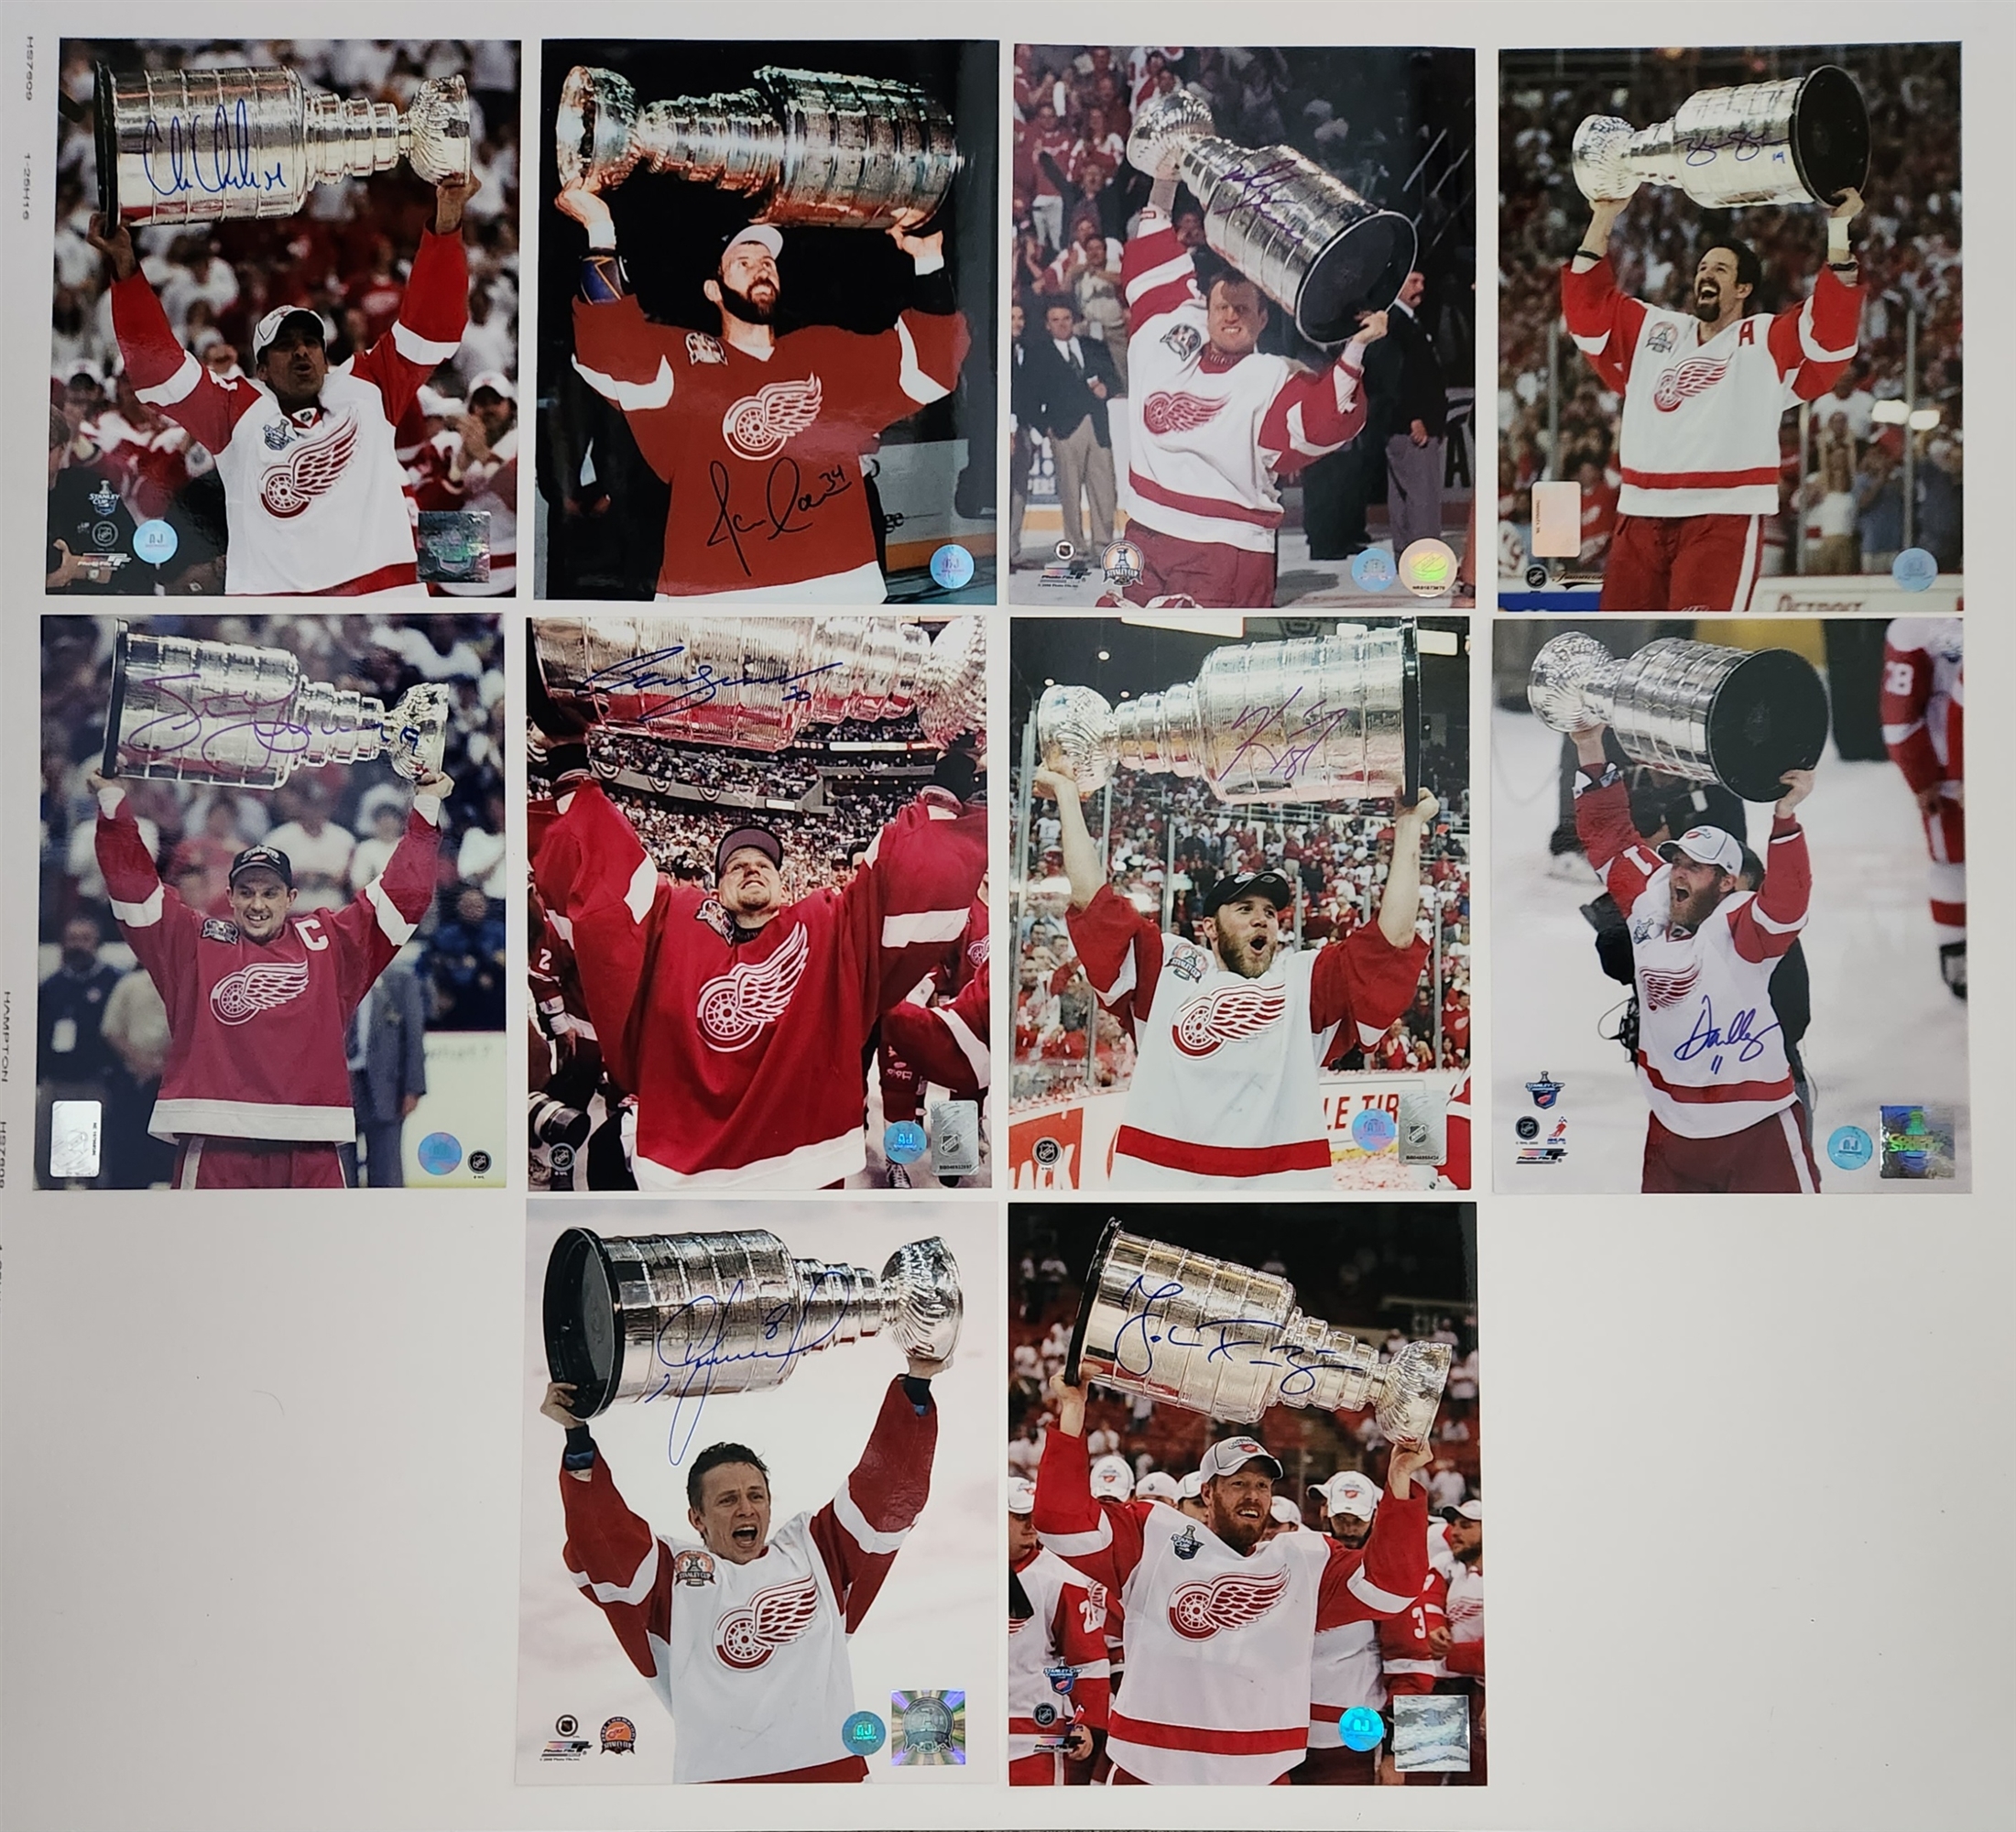 Detroit Red Wings Signed Stanley Cup Champions 8x10 Photo Lot of 10: Yzerman, Shanahan, Chelios